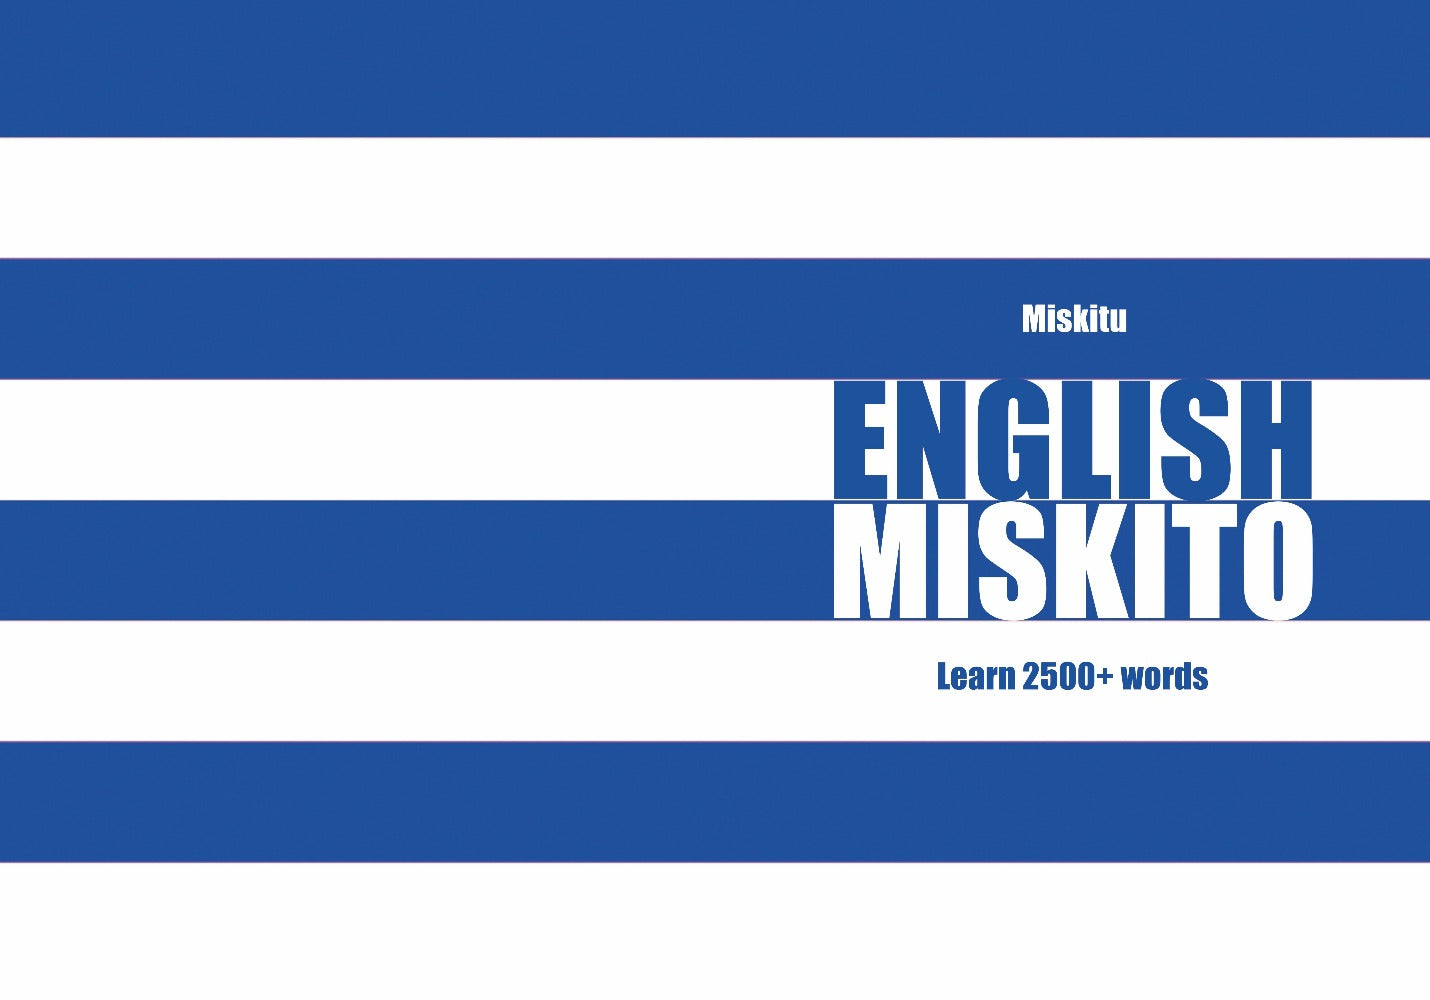 Miskito language learning notebook cover